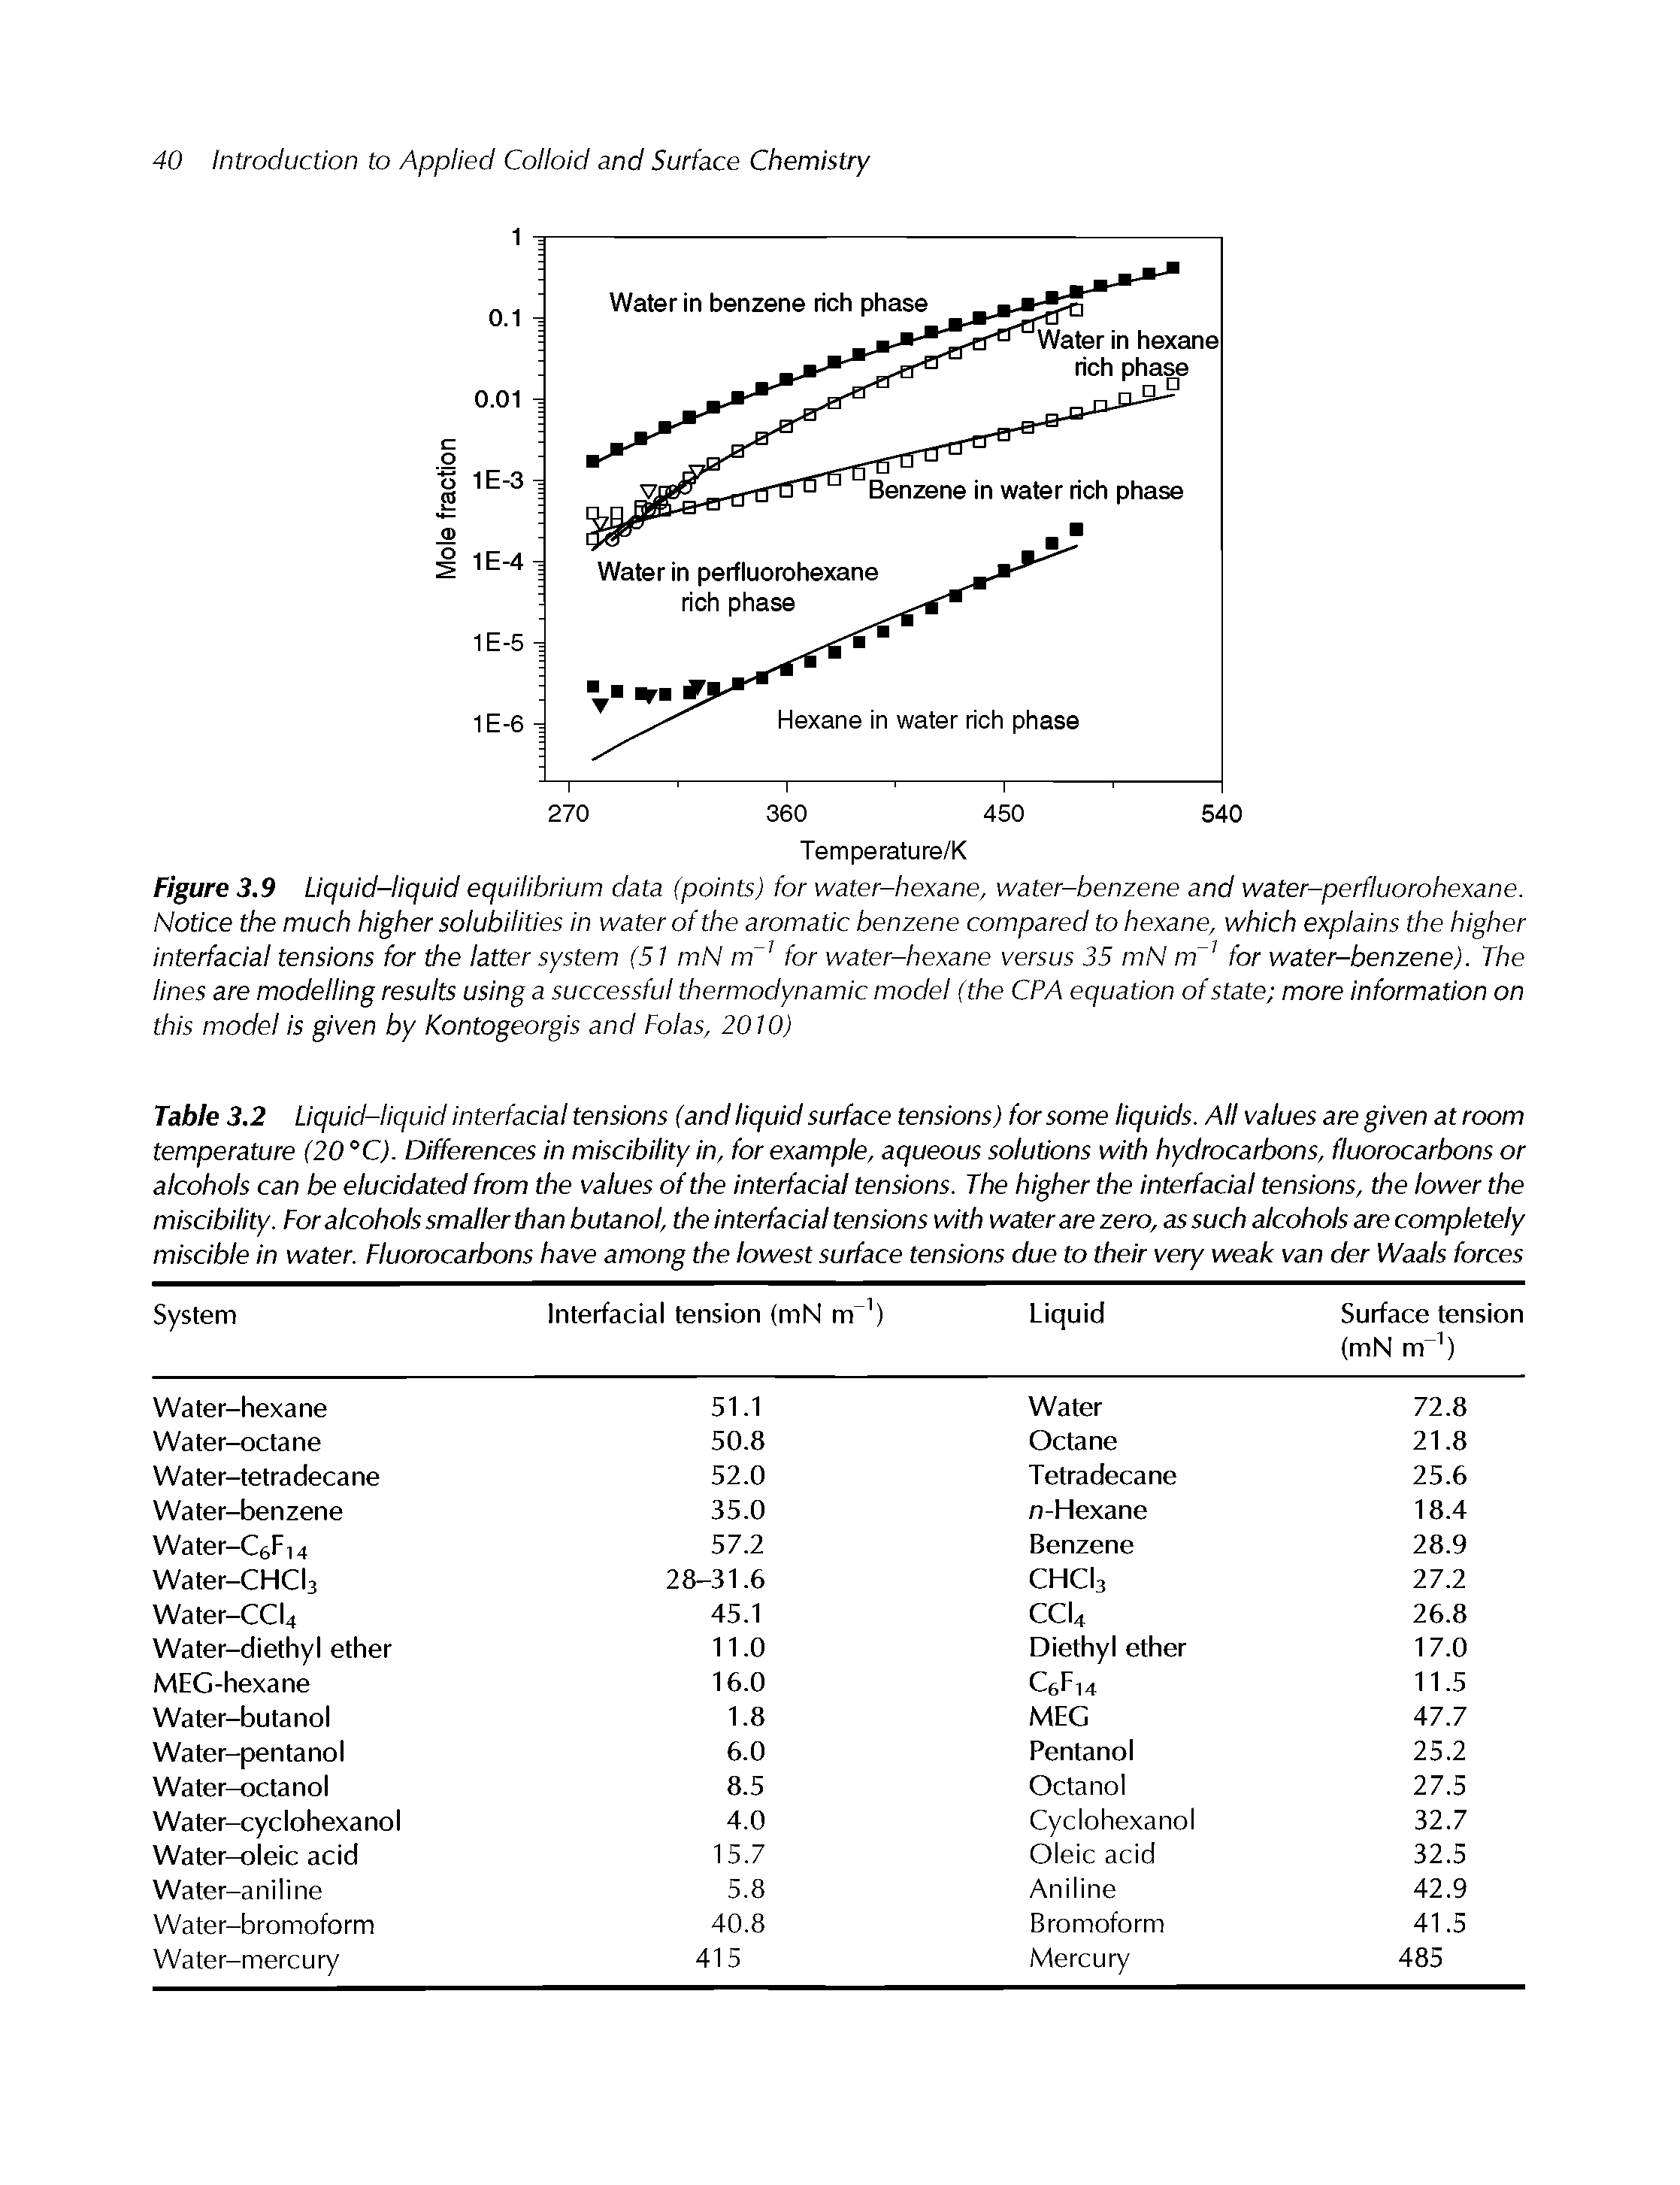 Table 3.2 Liquid-liquid interfacial tensions (and liquid surface tensions) for some liquids. All values are given at room temperature (20°C). Differences in miscibility in, for example, aqueous solutions with hydrocarbons, fluorocarbons or alcohols can be elucidated from the values of the interfaciail tensions. The higher the interfacial tensions, the lower the miscibility. For alcohols smaller than butanol, the interfacial tensions with water are zero, as such alcohols are completely miscible in water. Fluorocarbons have among the lowest surface tensions due to their very weak van der Waals forces...